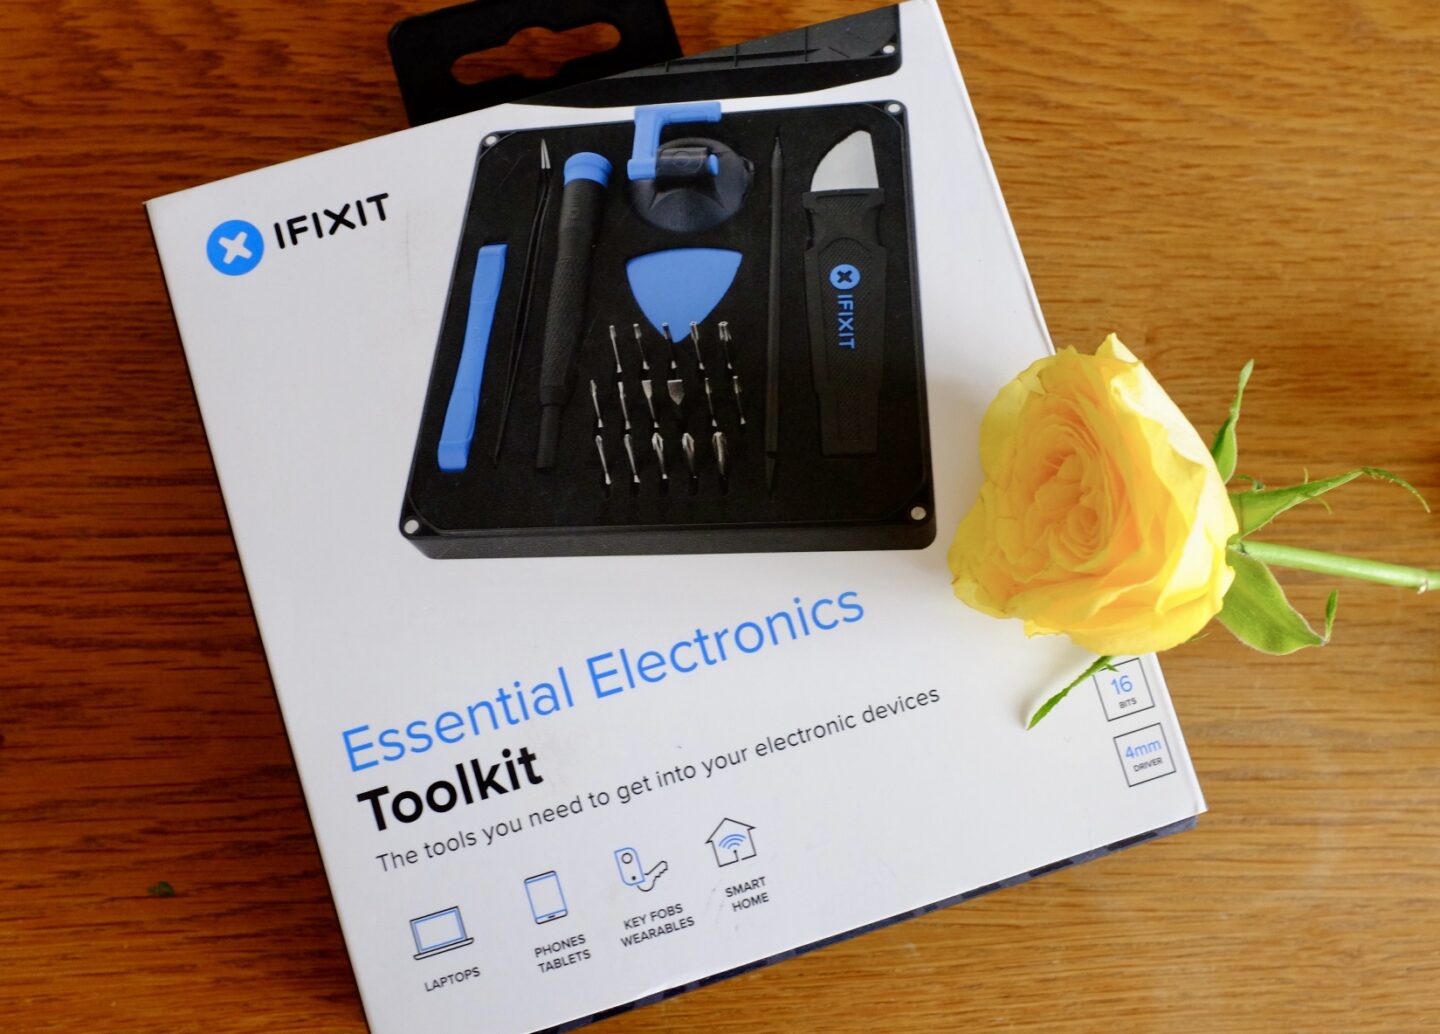 Essential Electronics Toolkit by iFixit from Sugru